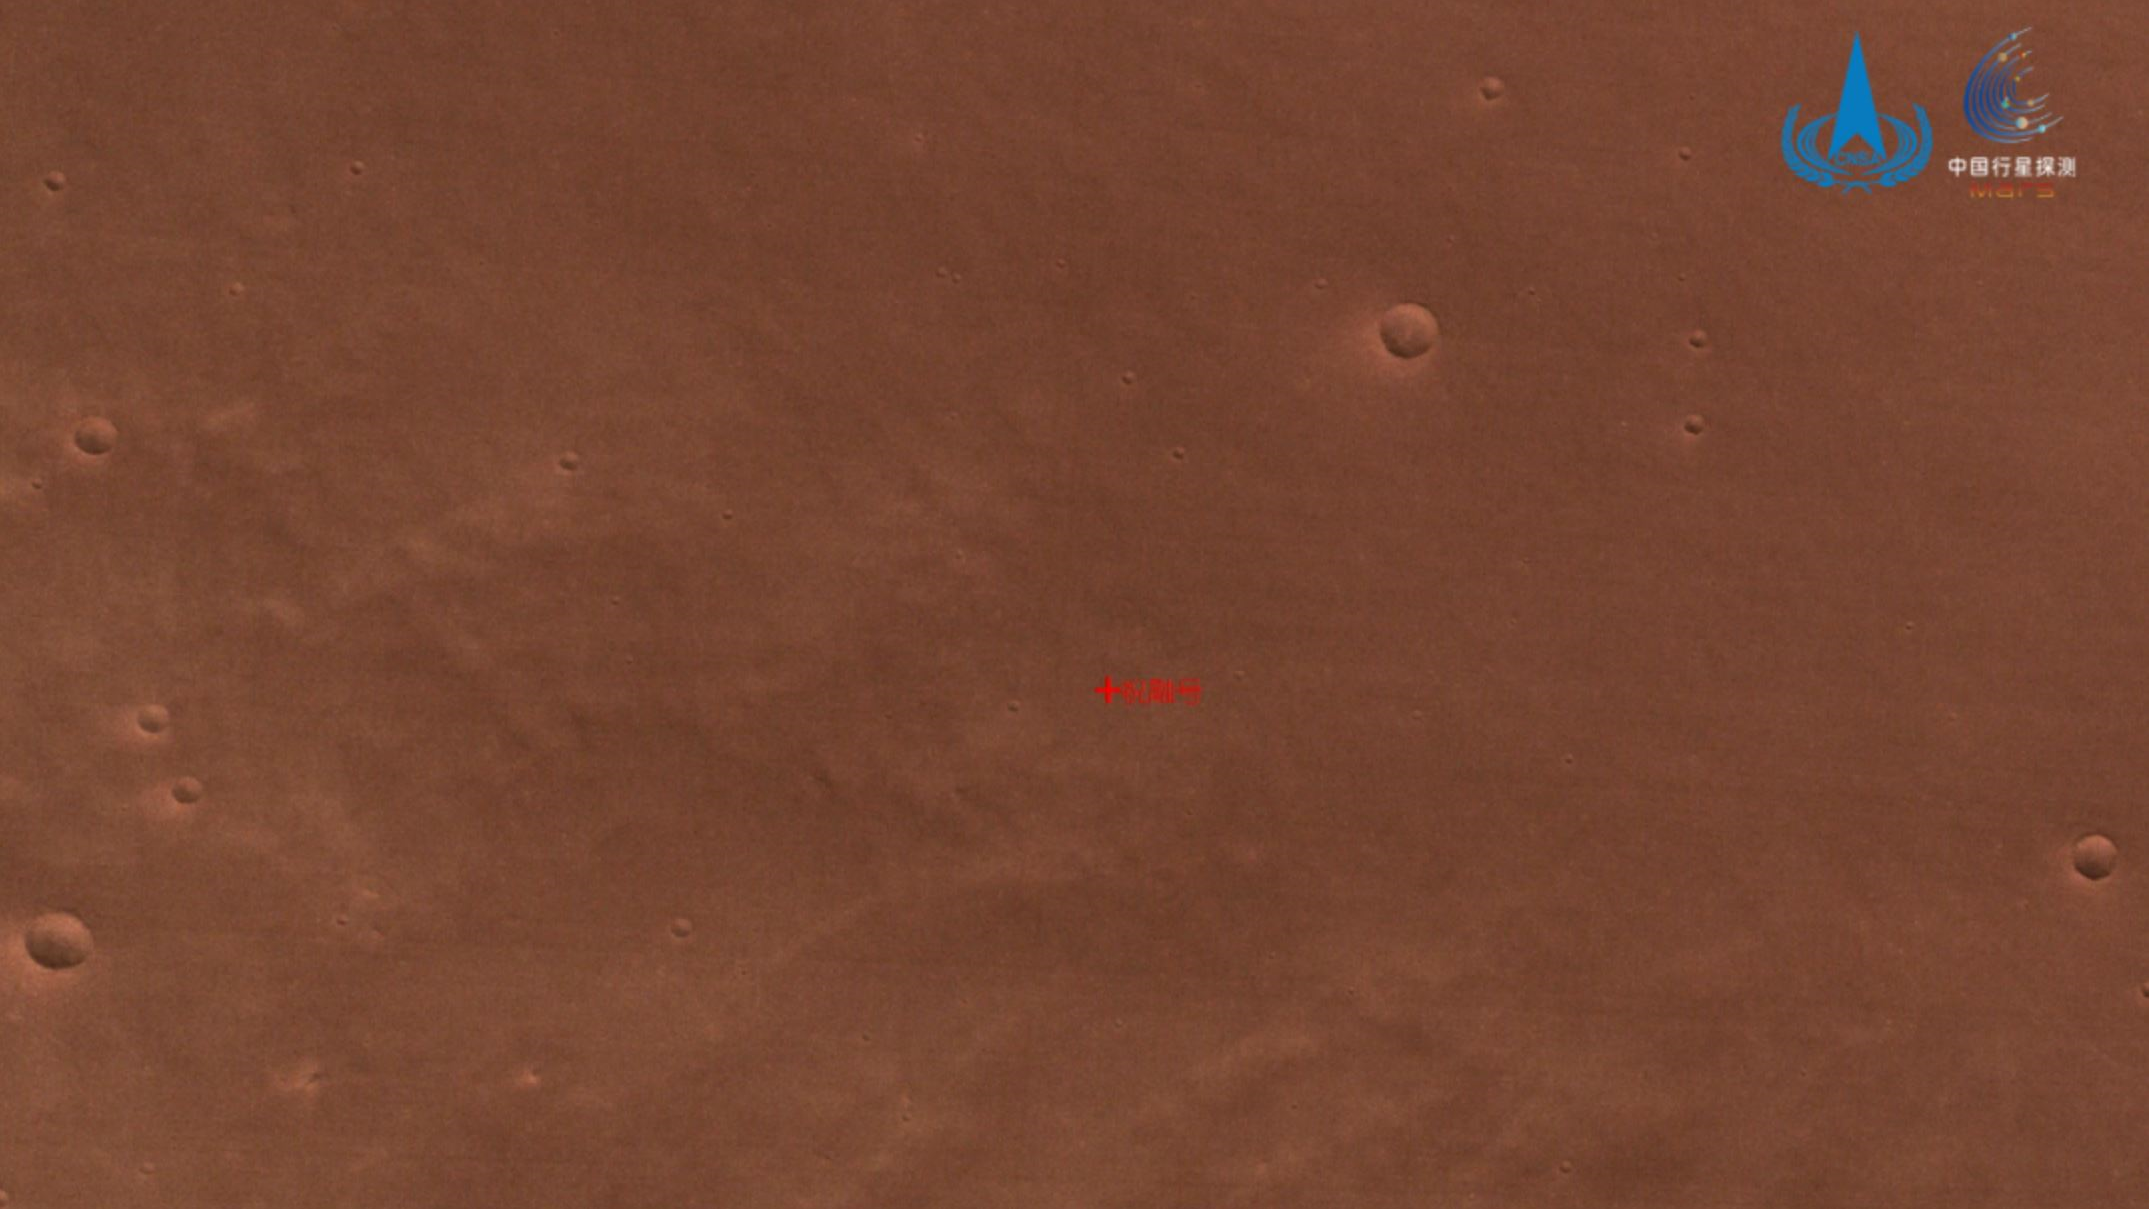 There are craters on the red surface of Mars